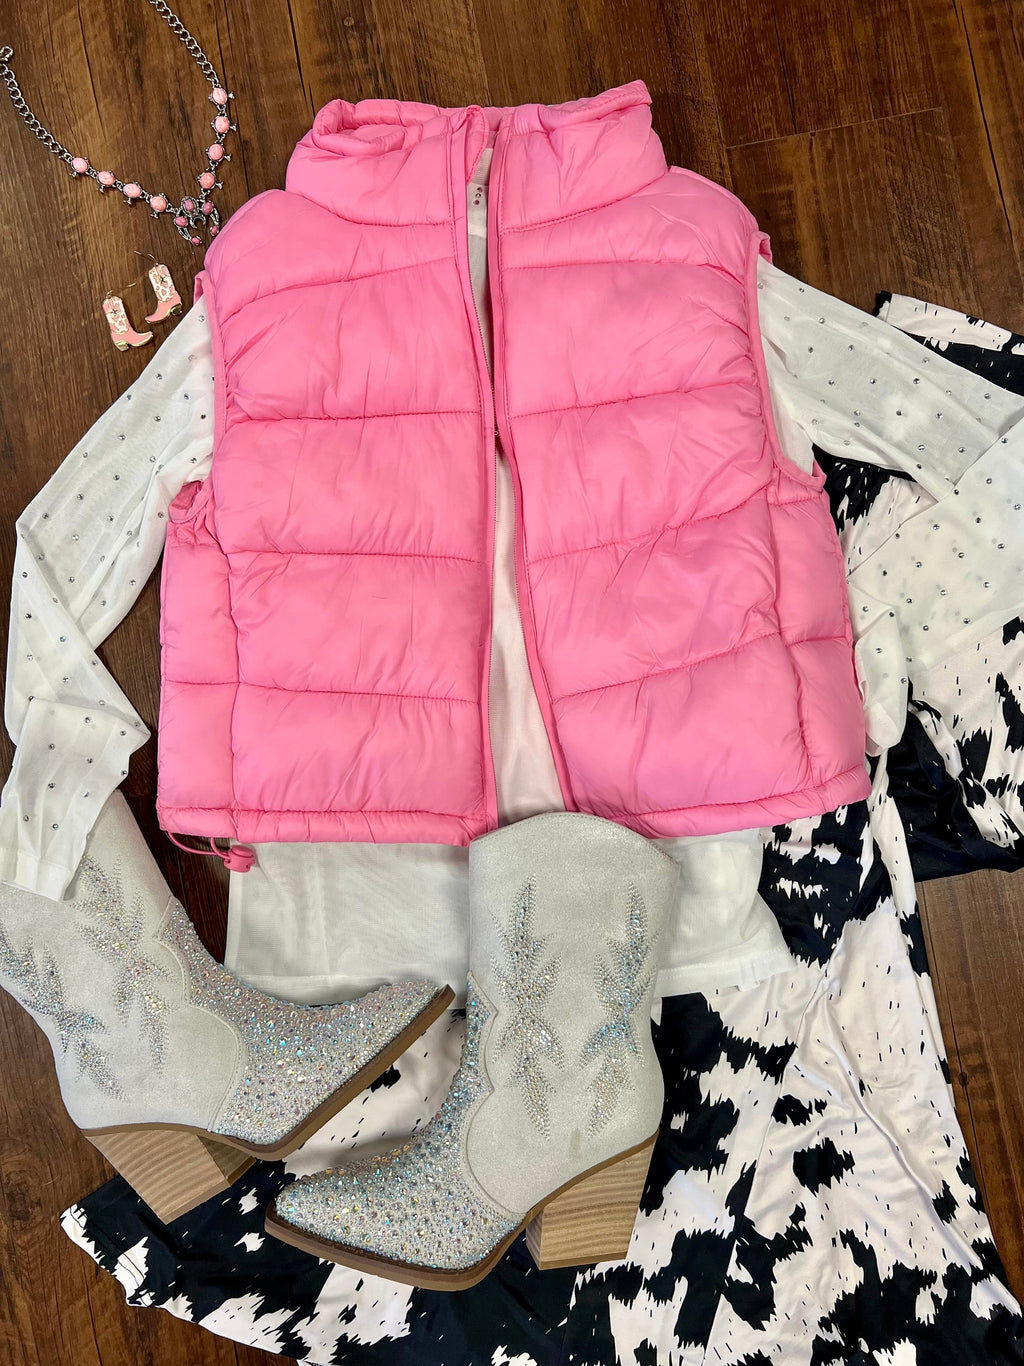 puffer vest, zip up, cotton candy pink. Small Business. Get Gussied Up